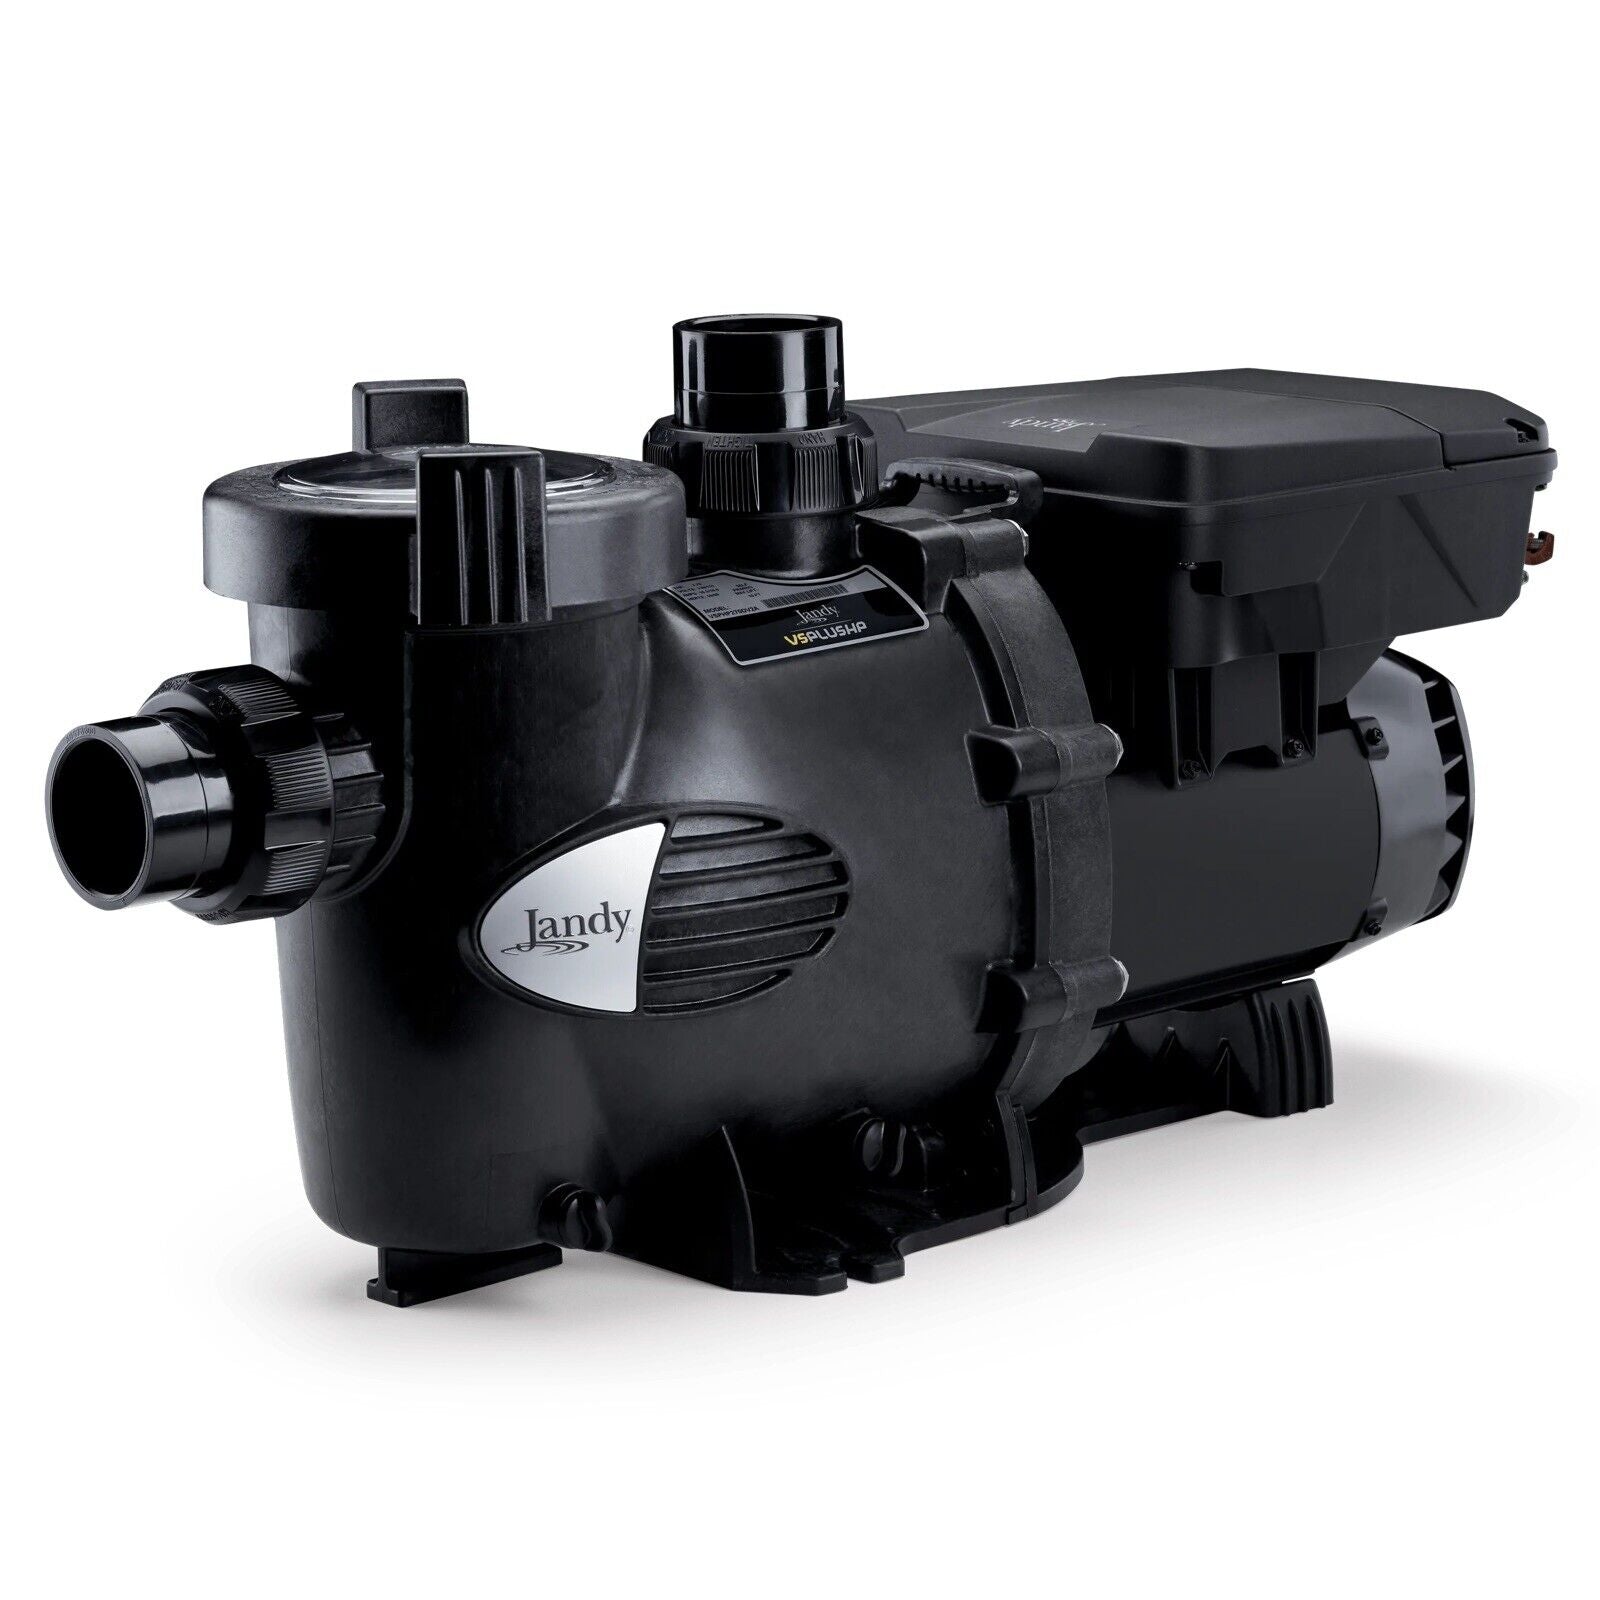 Jandy VS PlusHP Variable Speed Pump 2.7HP 115/230V without Controller VSPHP270DV2A - Variable Speed Pumps - img-1